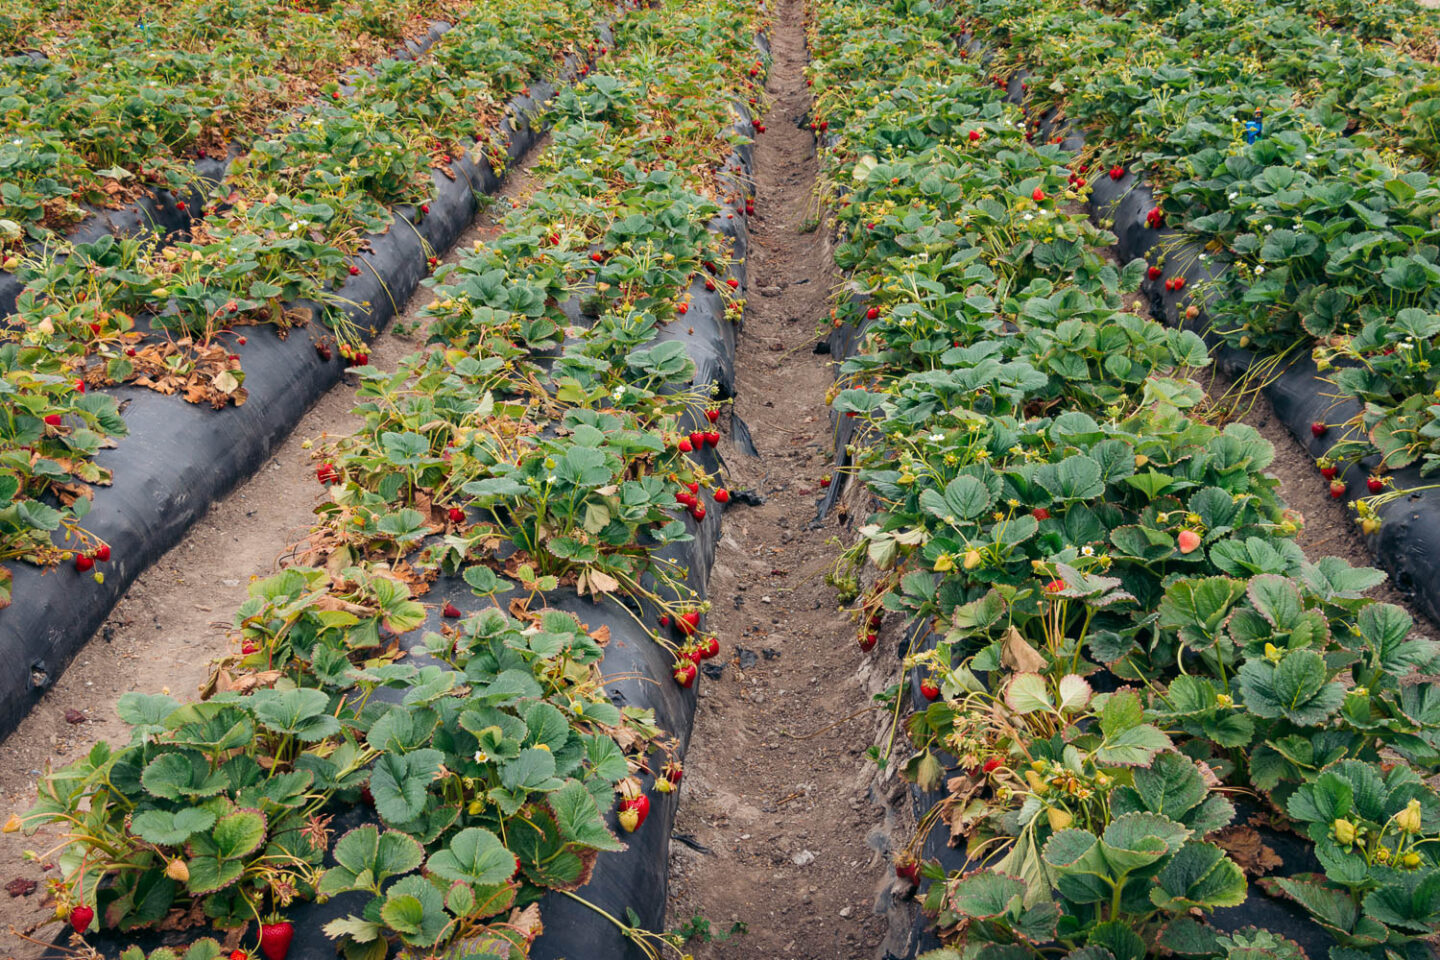 Growing strawberries - California farms - Roads and Destinations